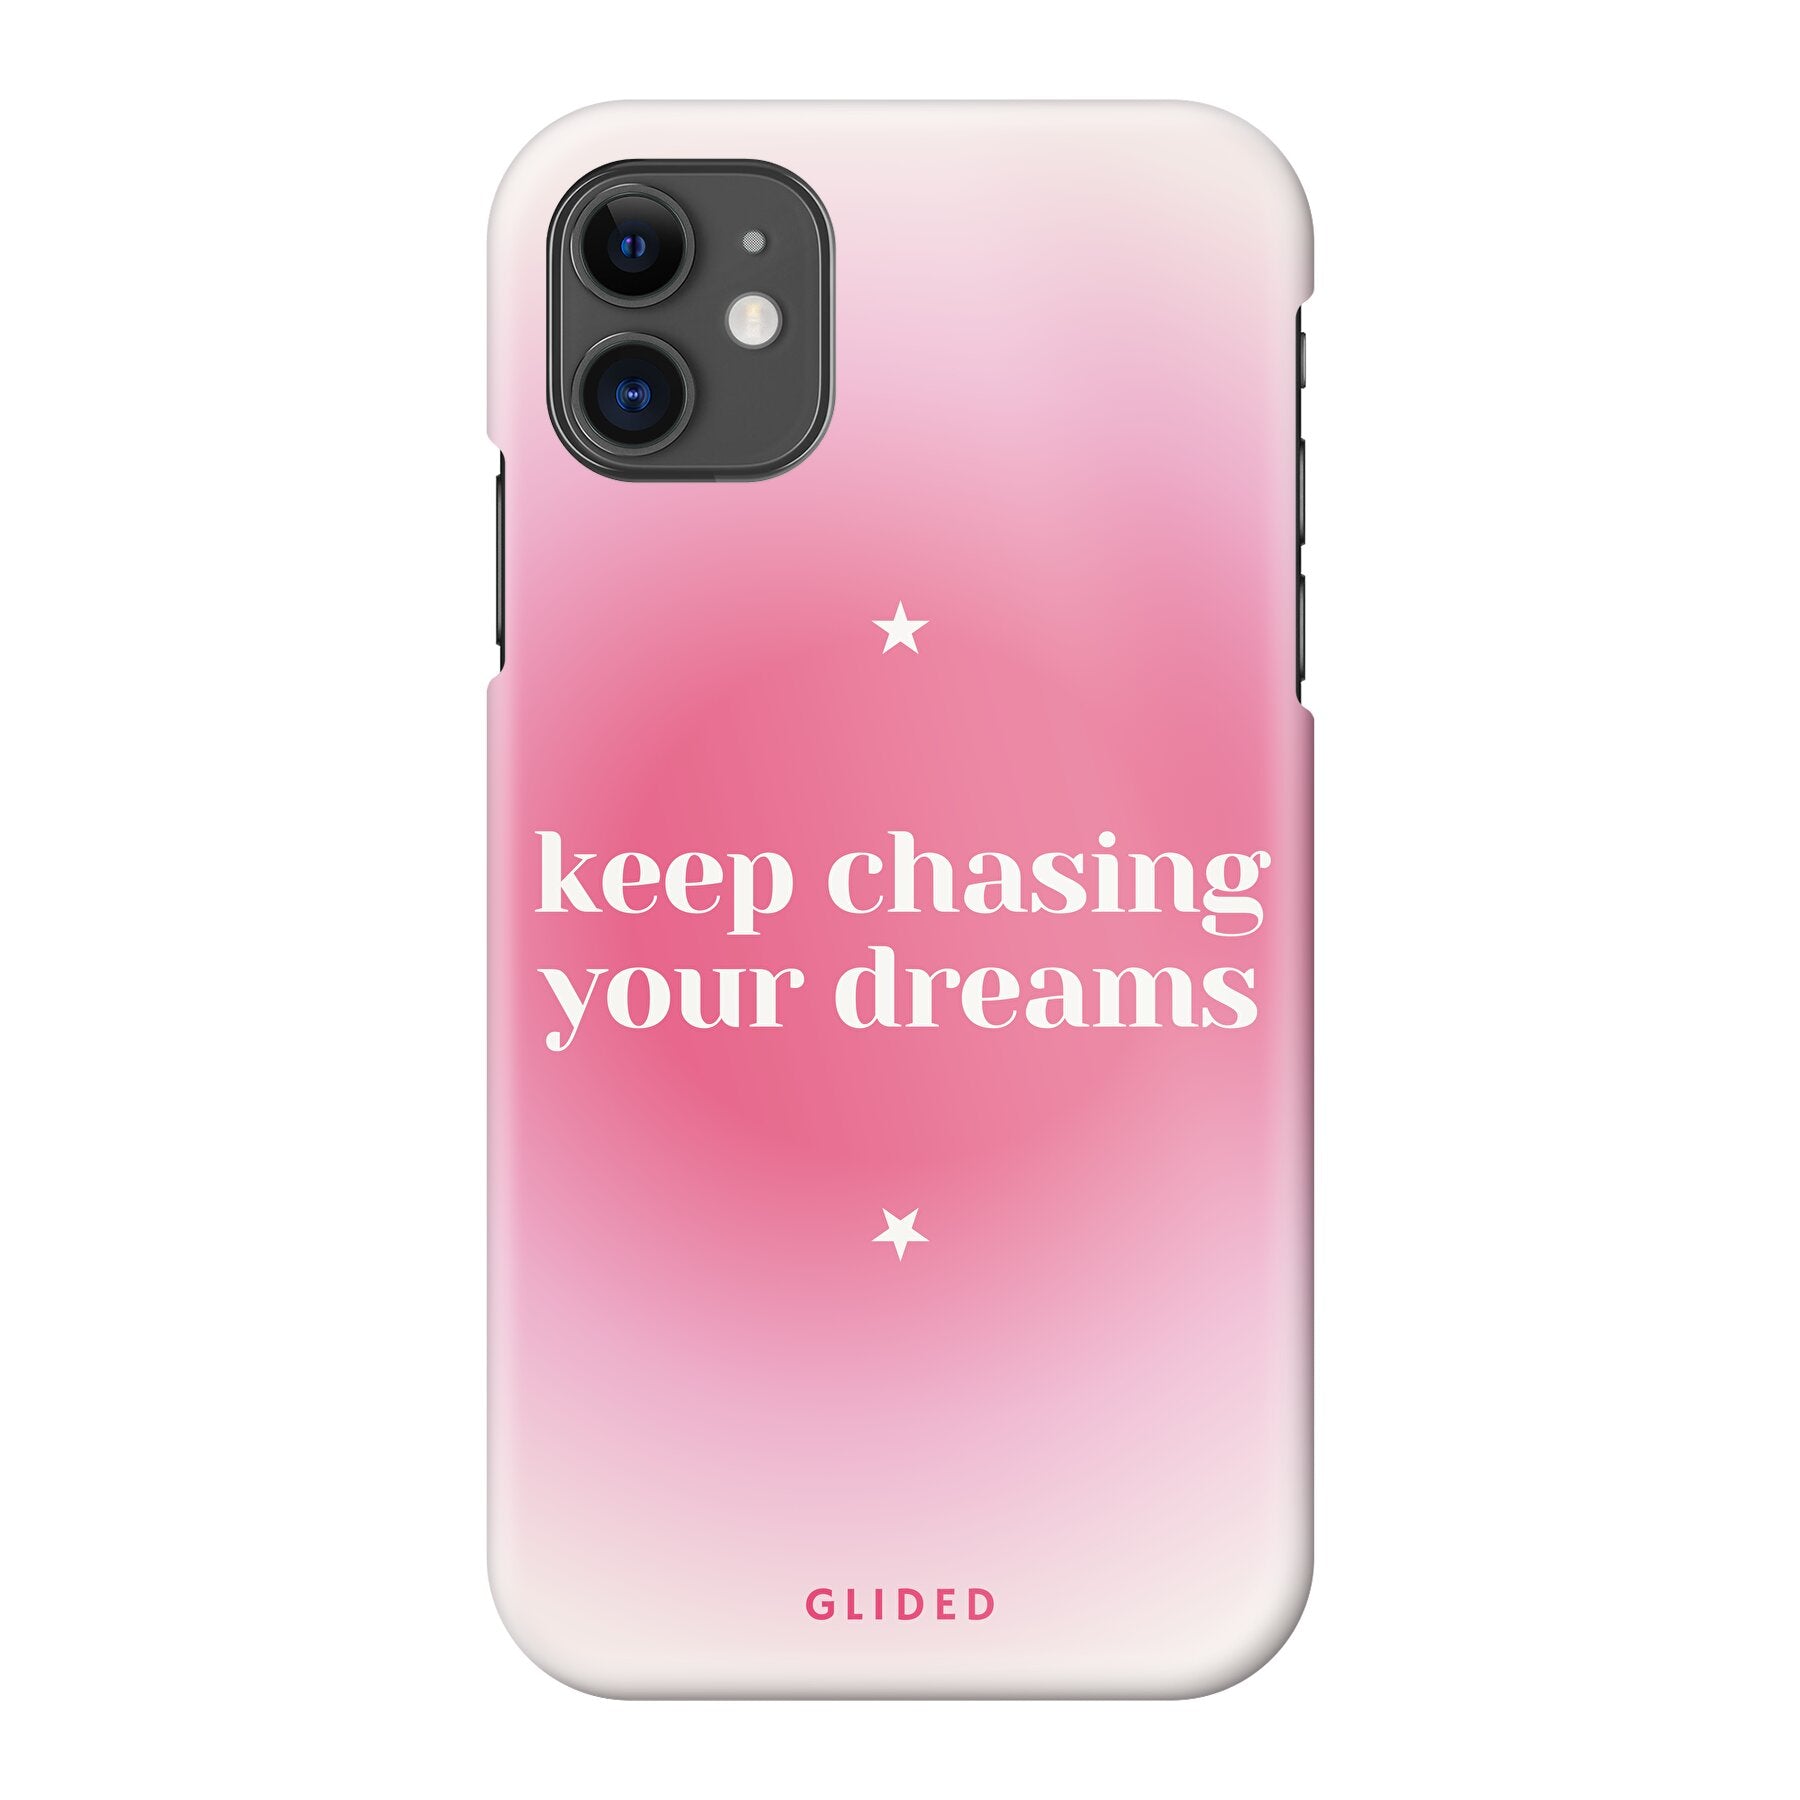 Chasing Dreams - iPhone 11 Handyhülle Hard Case